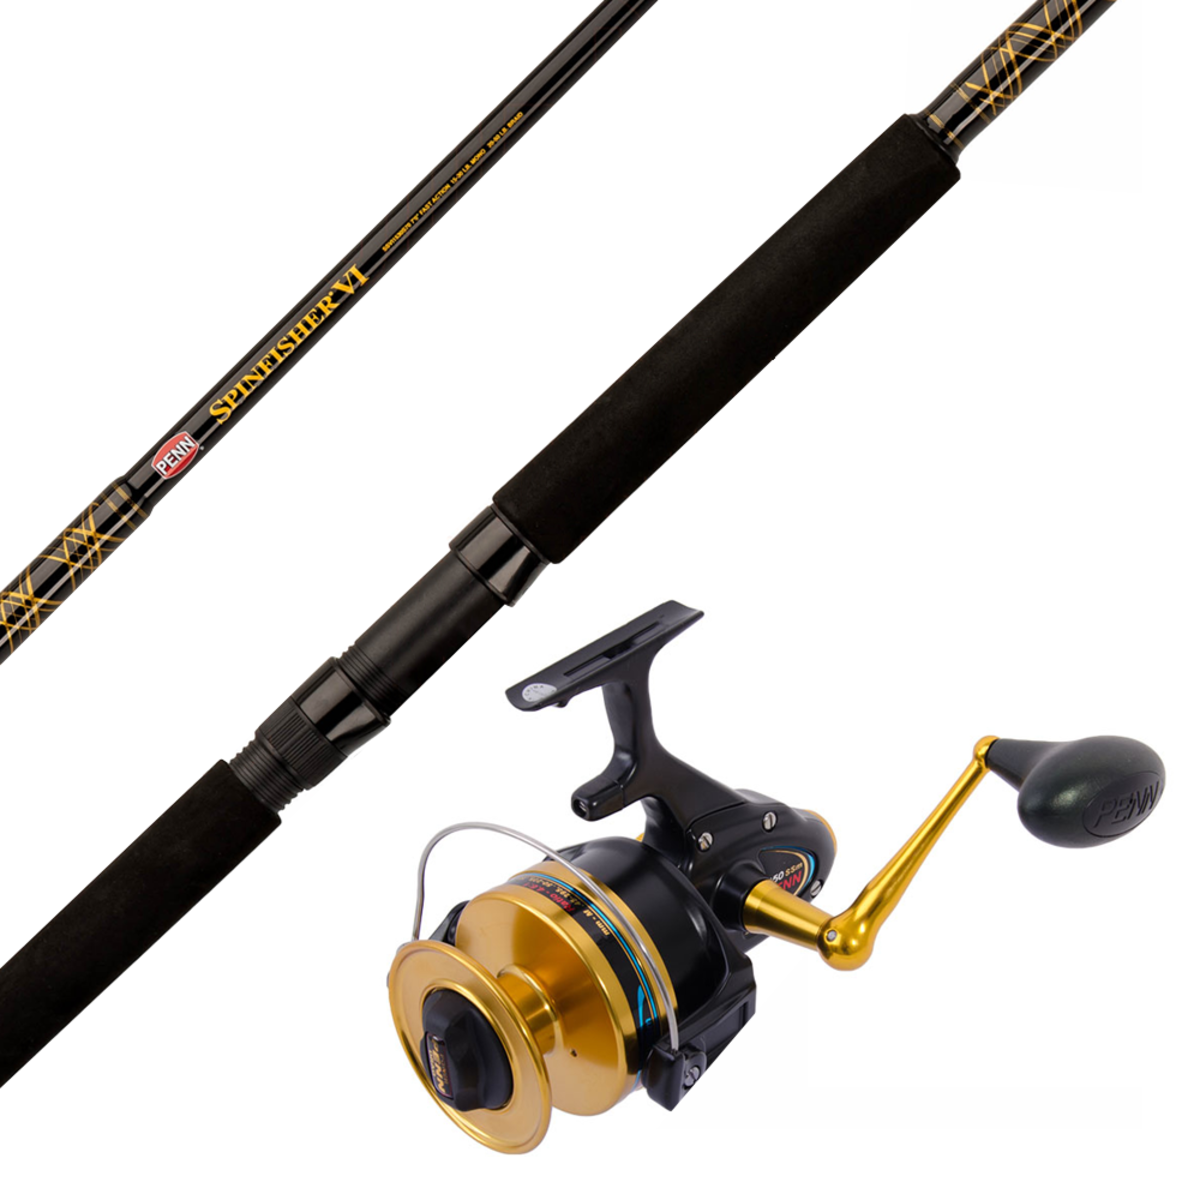 https://www.smartmarine.co.nz/cdn/images/products/xlarge/8067002_spinfisher_combo.png